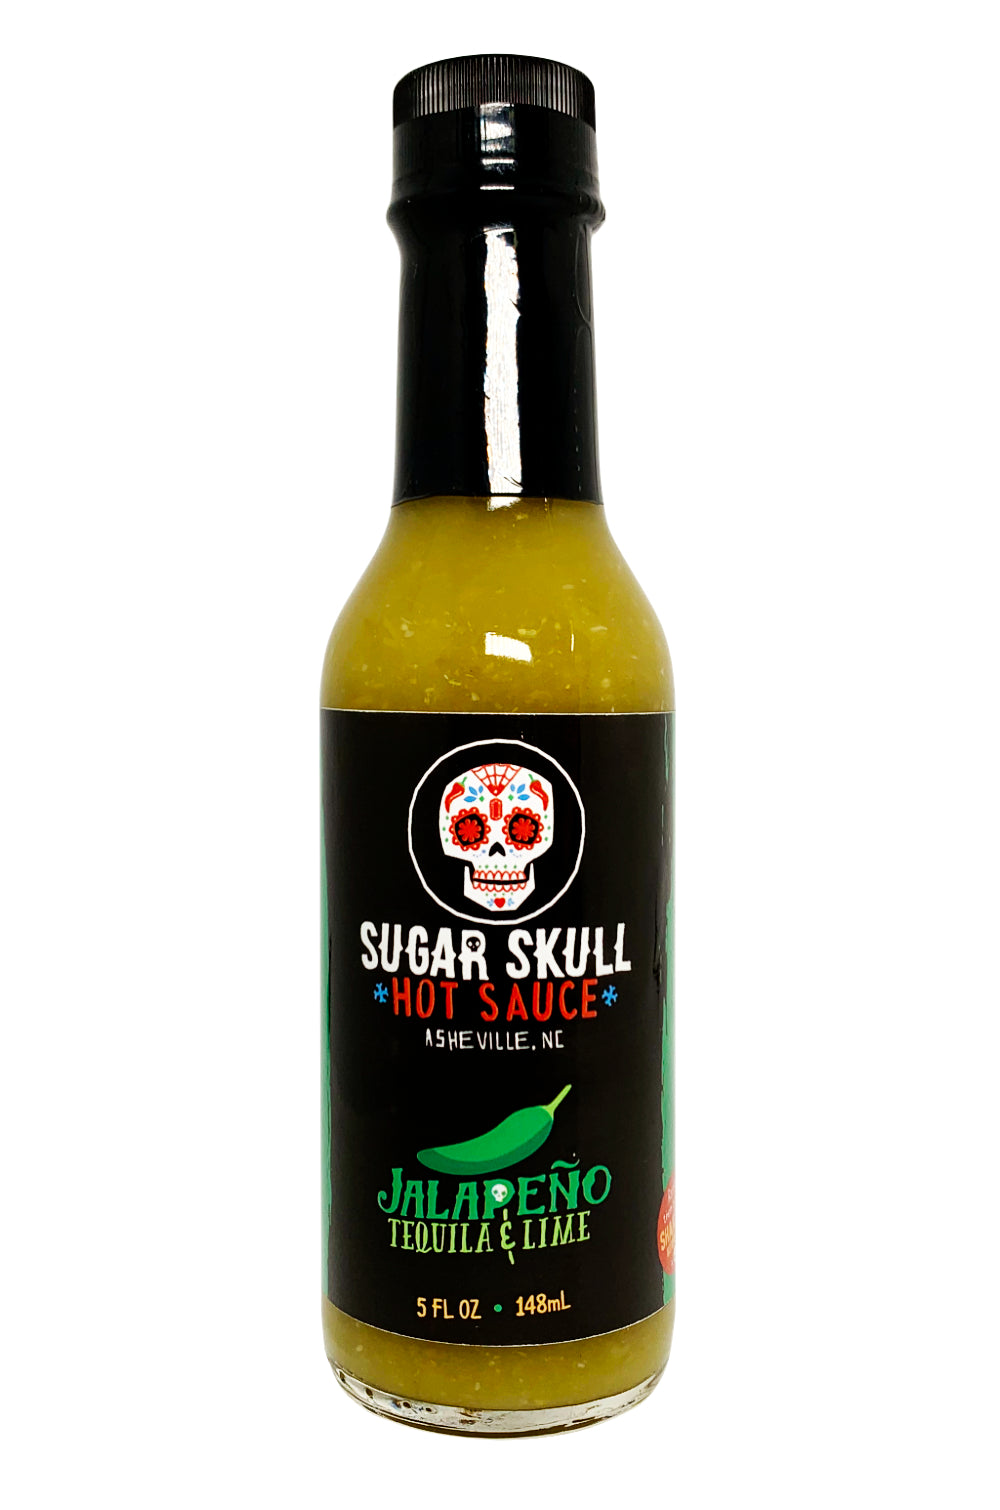 Sugar Skull Jalapeno Tequila and Lime